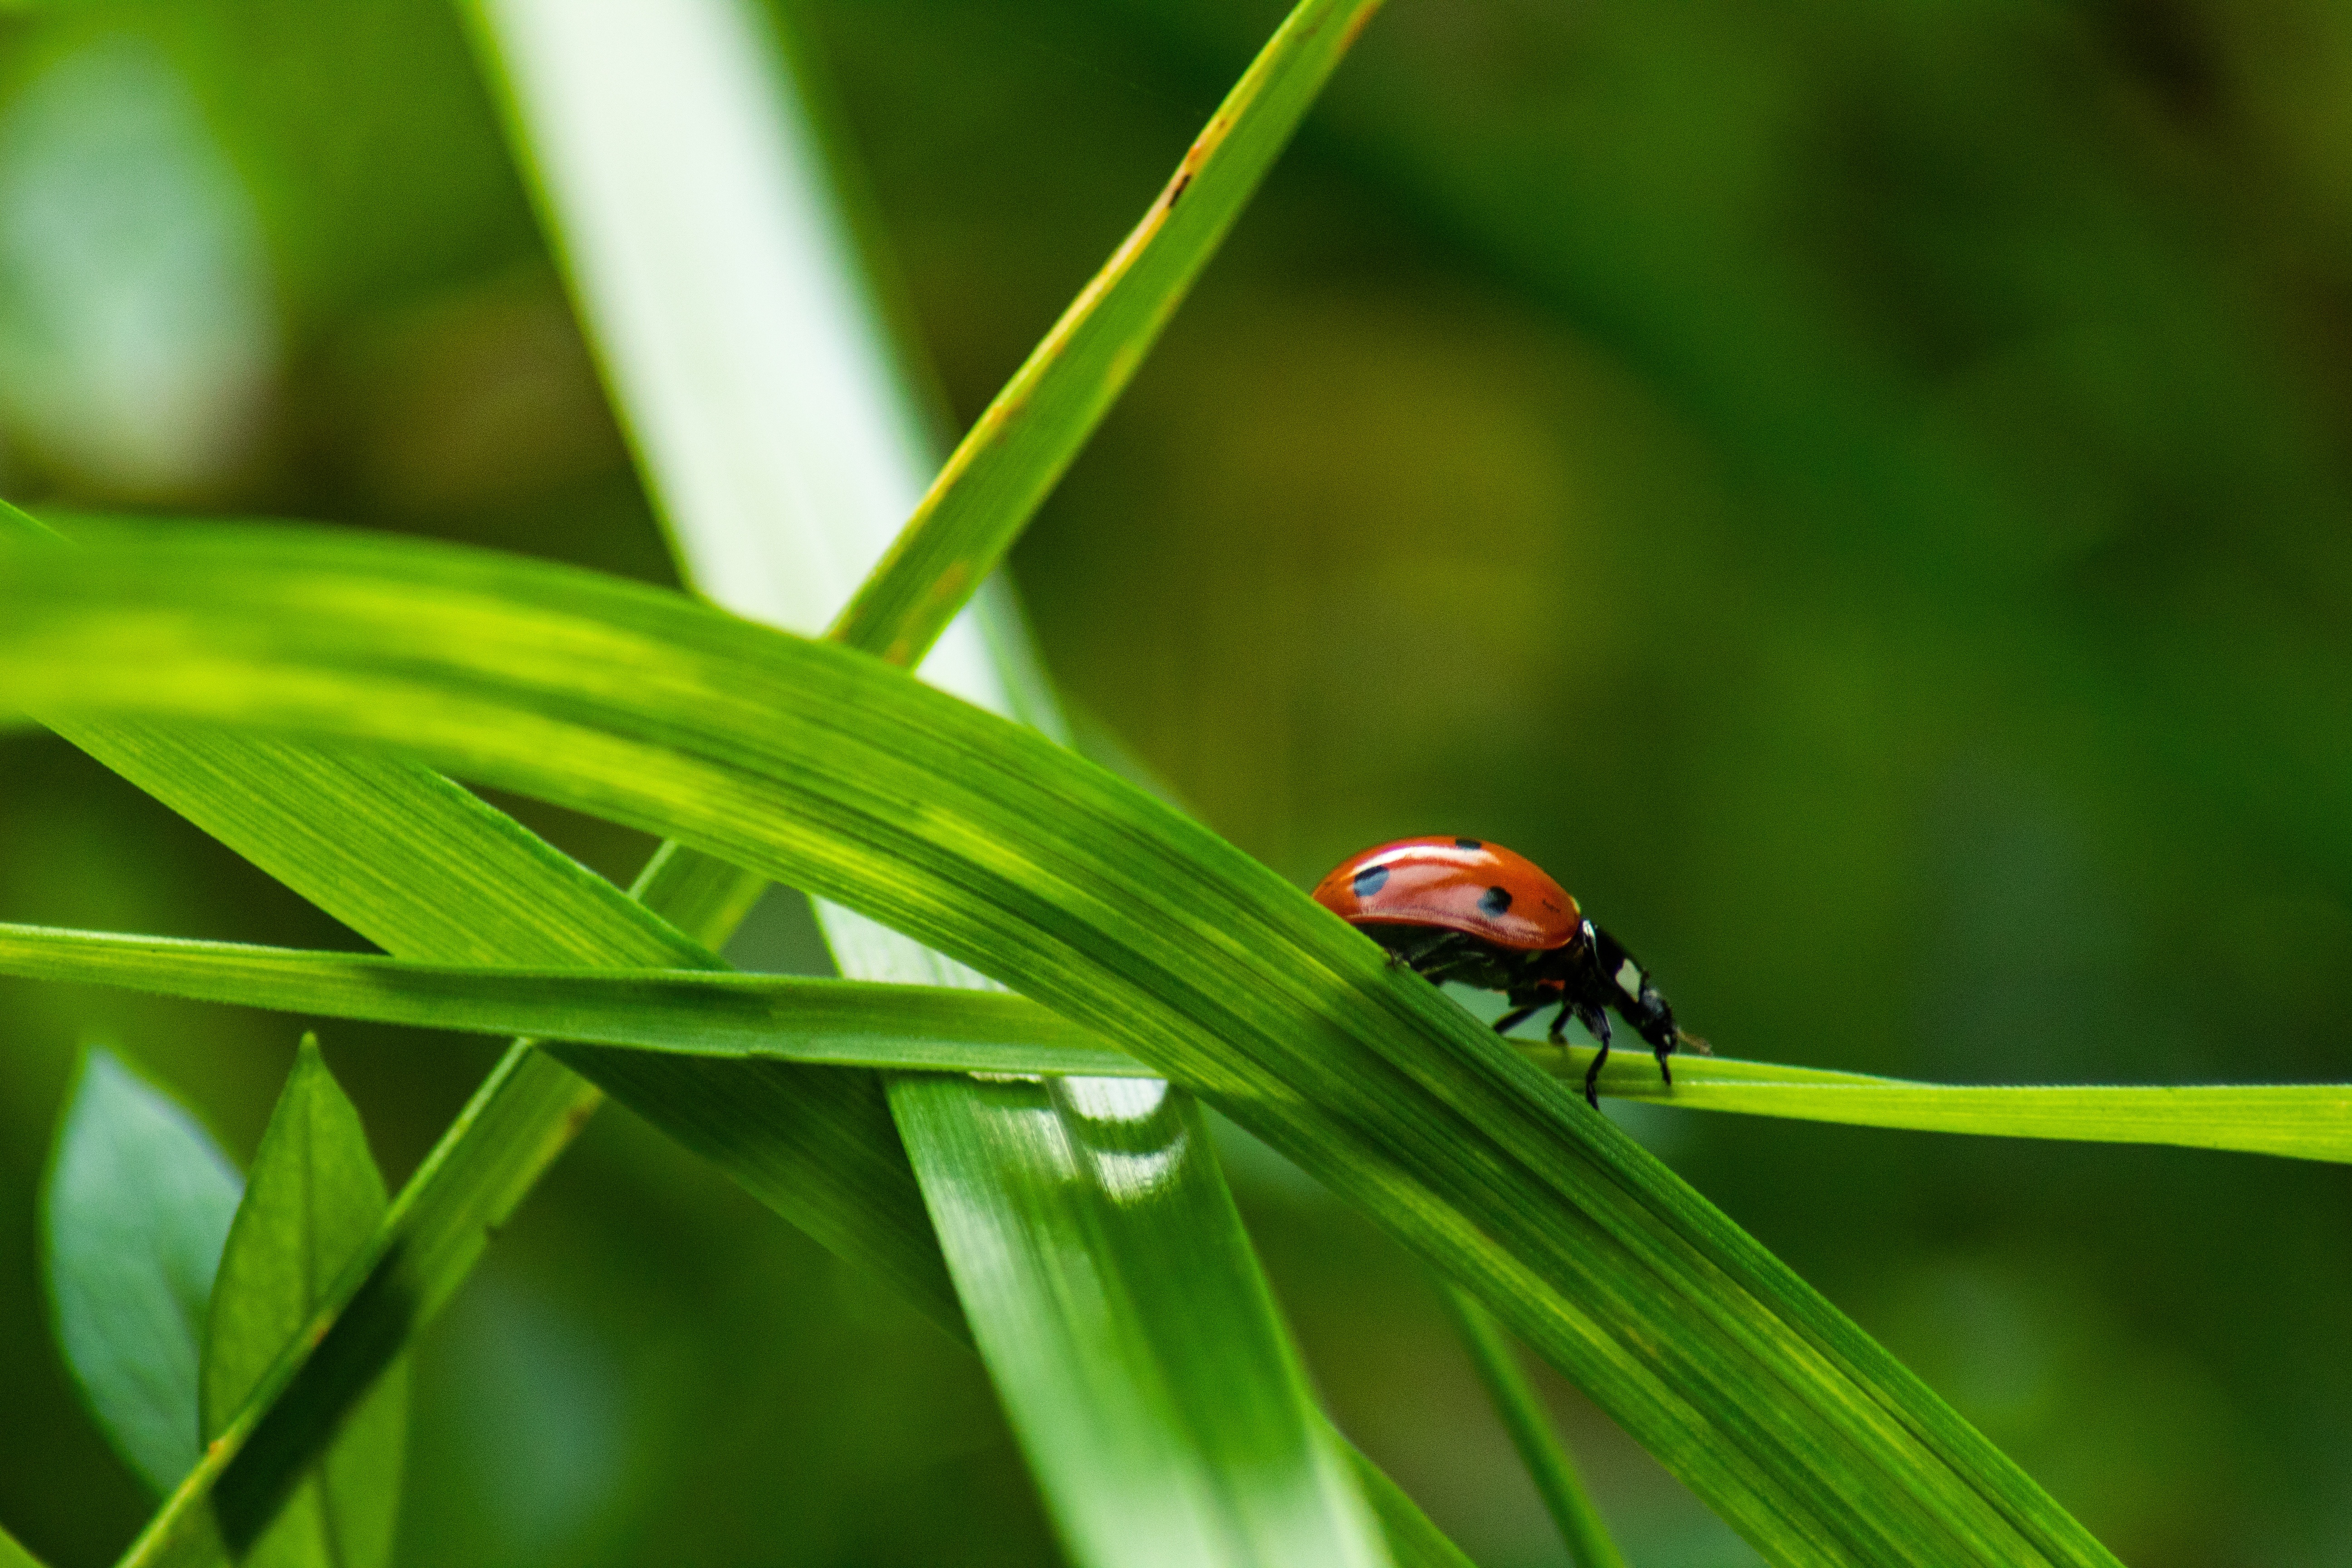 Wallpapers insect ladybug grass on the desktop